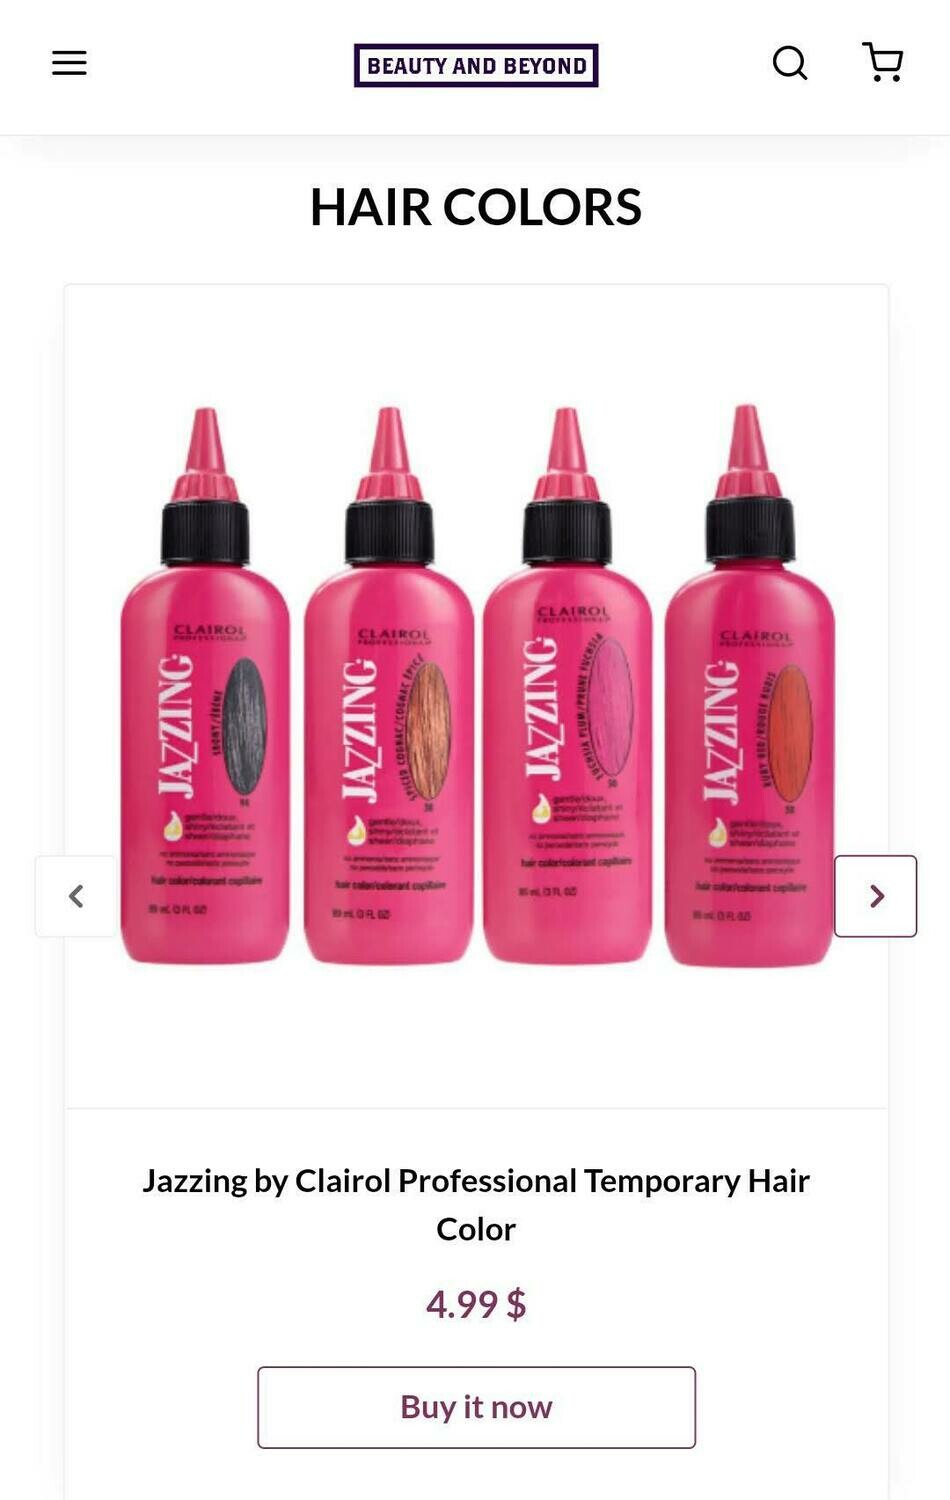 Jazzing by Clairol Professional Temporary Hair Color